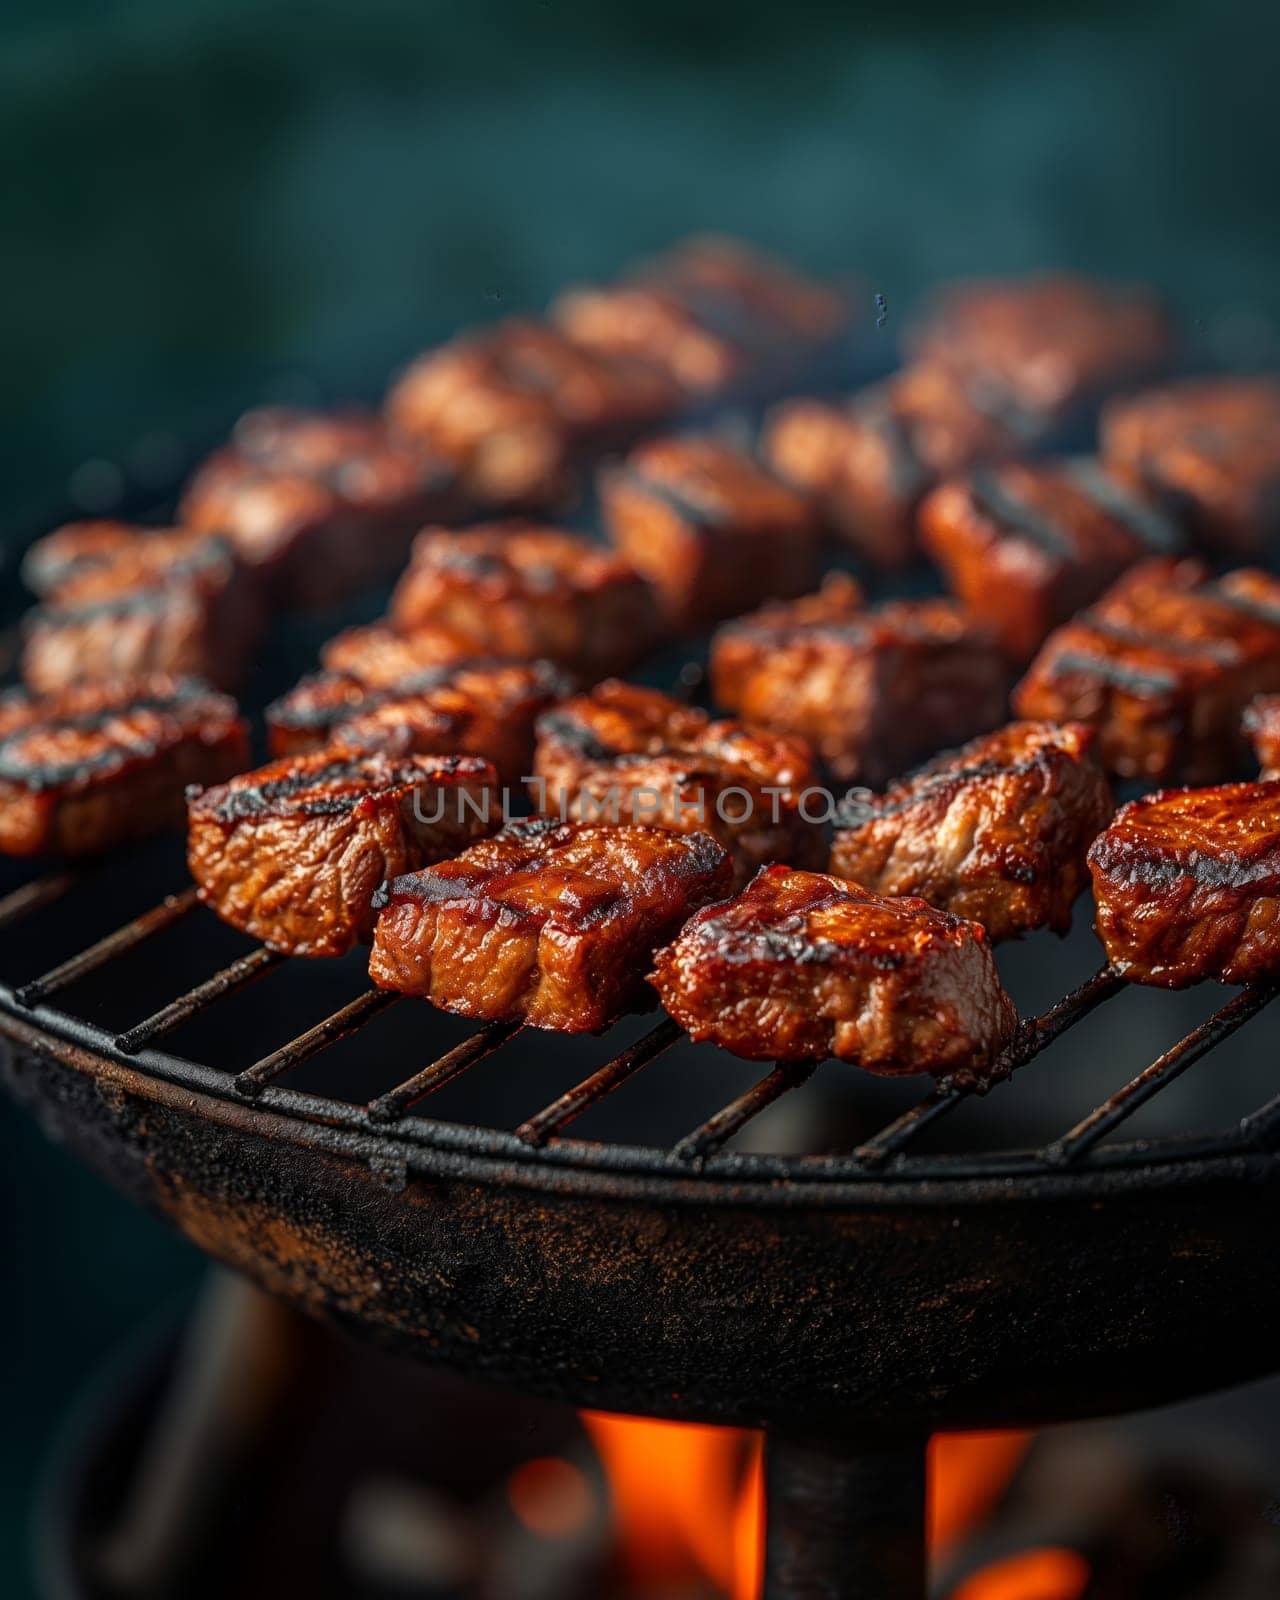 Pieces of meat cooked on the grill. Selective focus